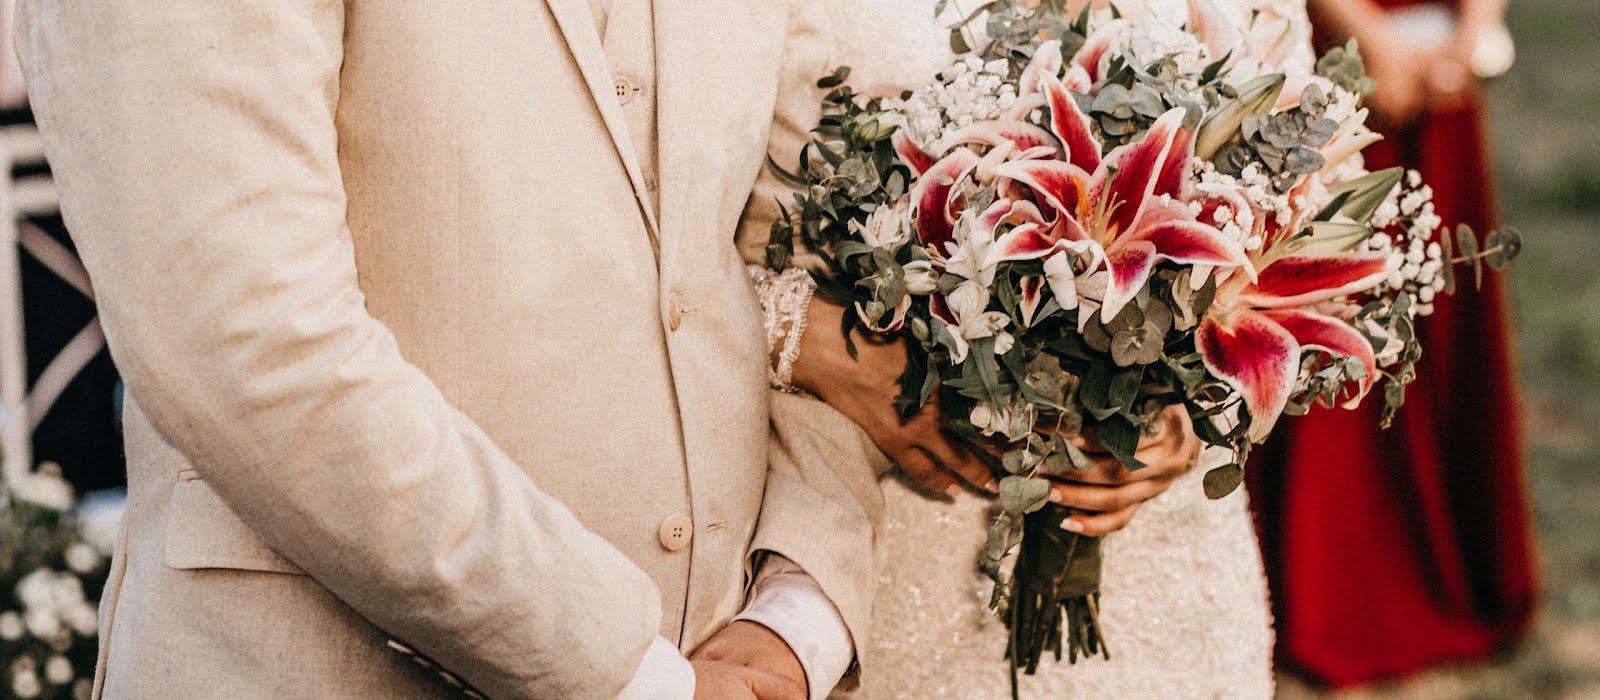 Considering a florist for your wedding? Here’s everything you need to know